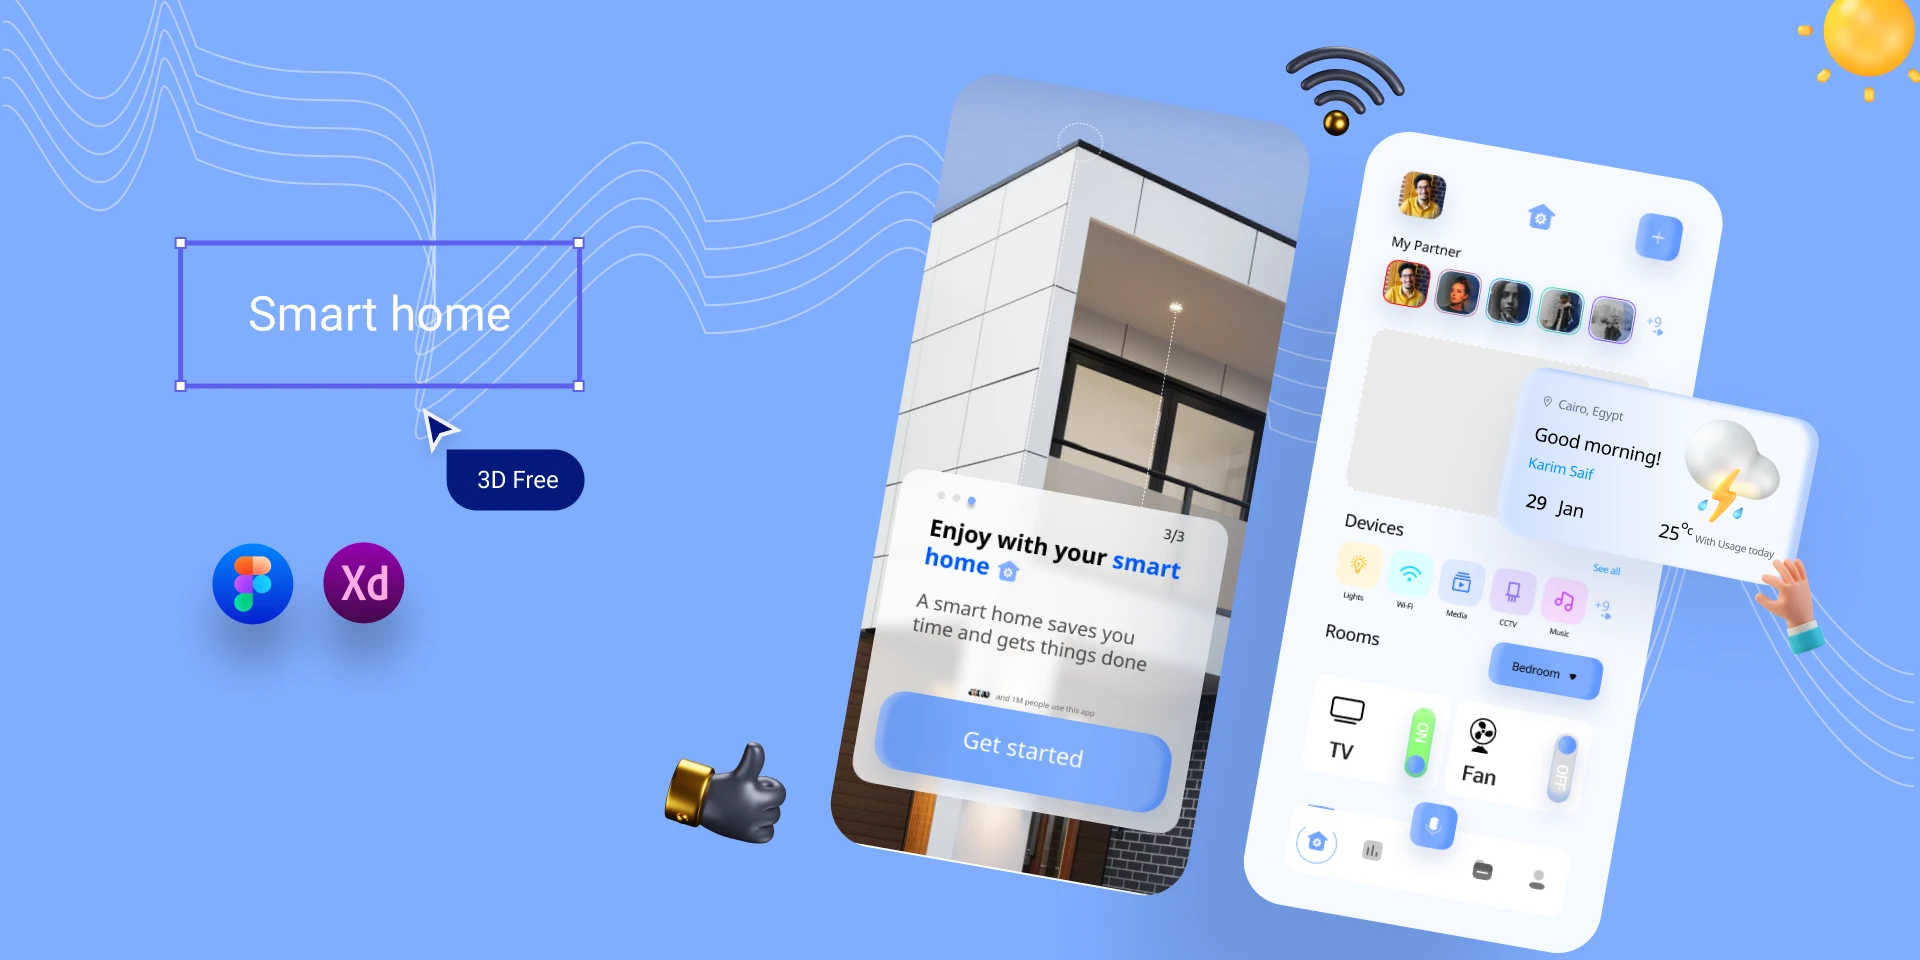 Smart Home Free (3D Free) for Figma and Adobe XD